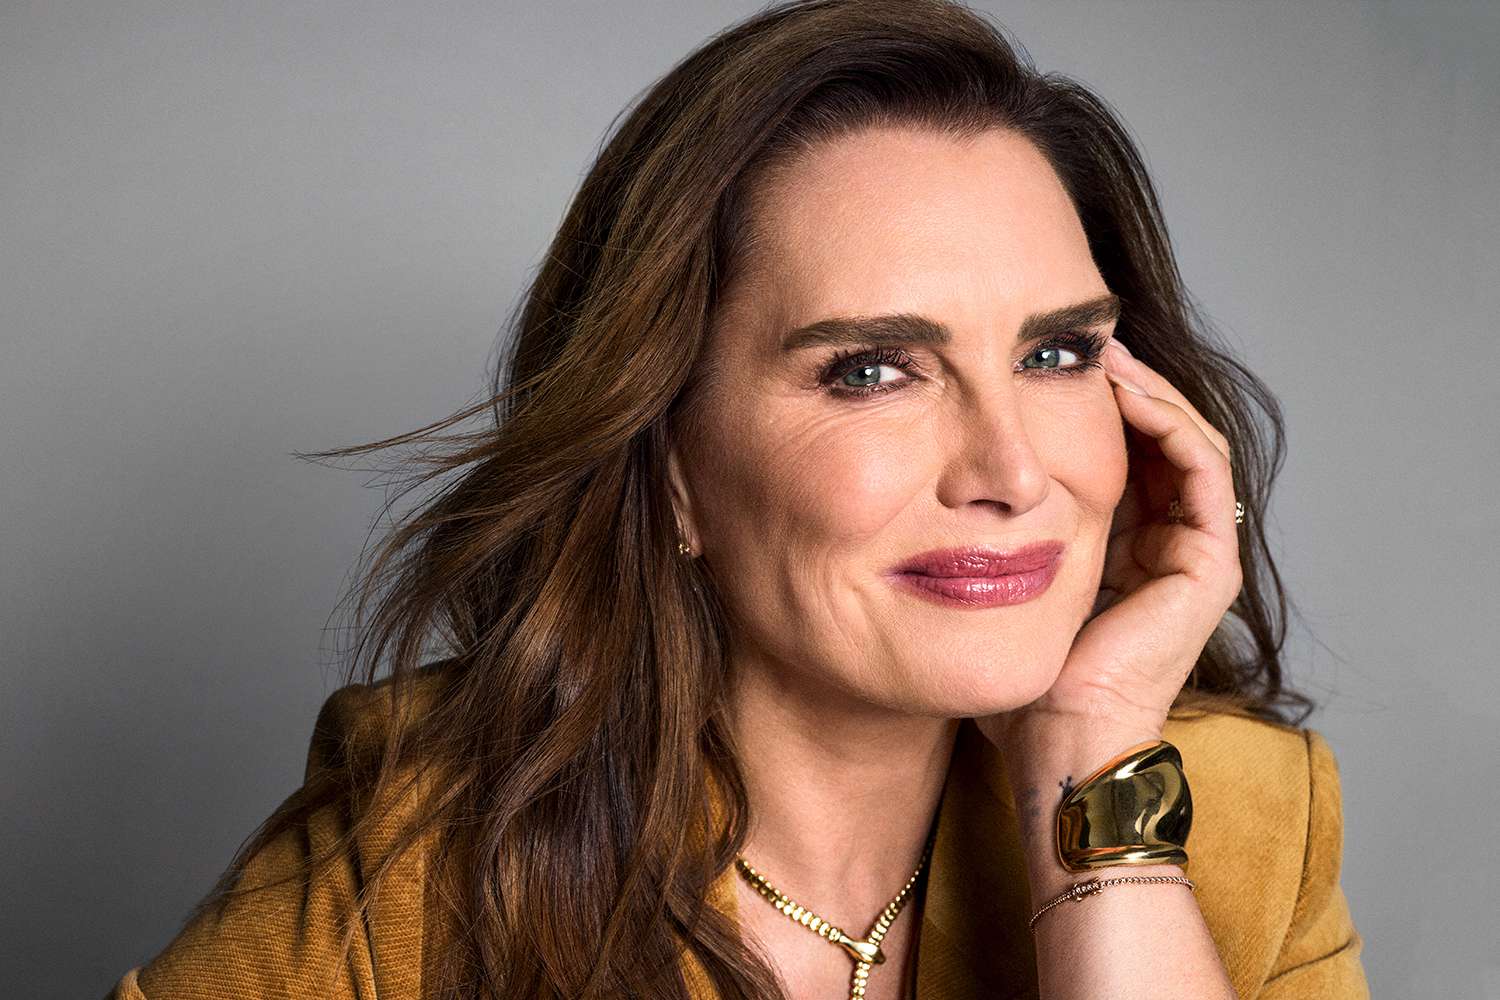 Brooke Shields Says She Feels Change ‘Brewing’ As She Turns 59 (Exclusive)